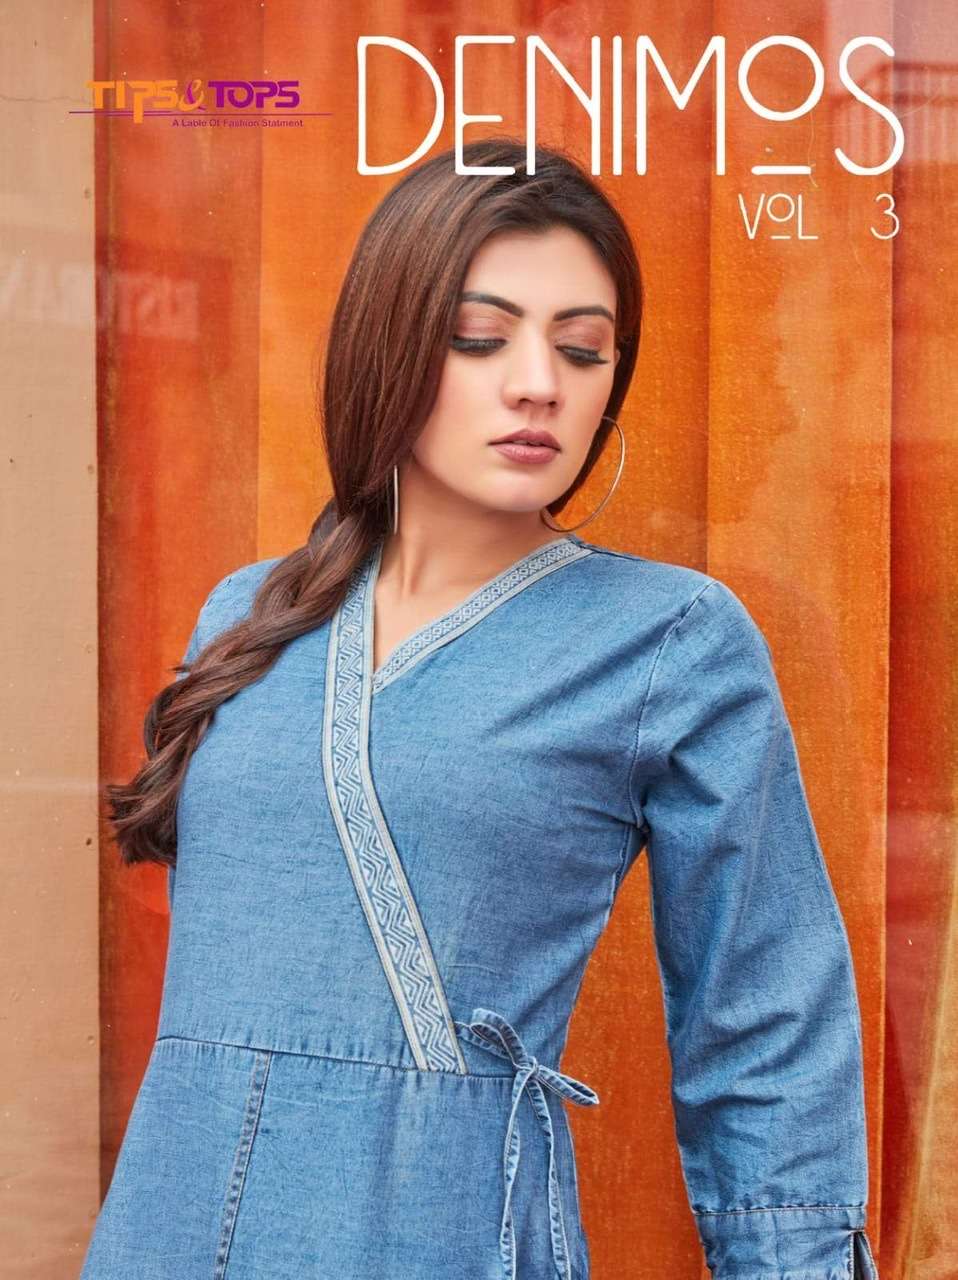 Tips & tops denimos vol 3 fancy cotton denim readymade kurti western tops at wholesale Rate 